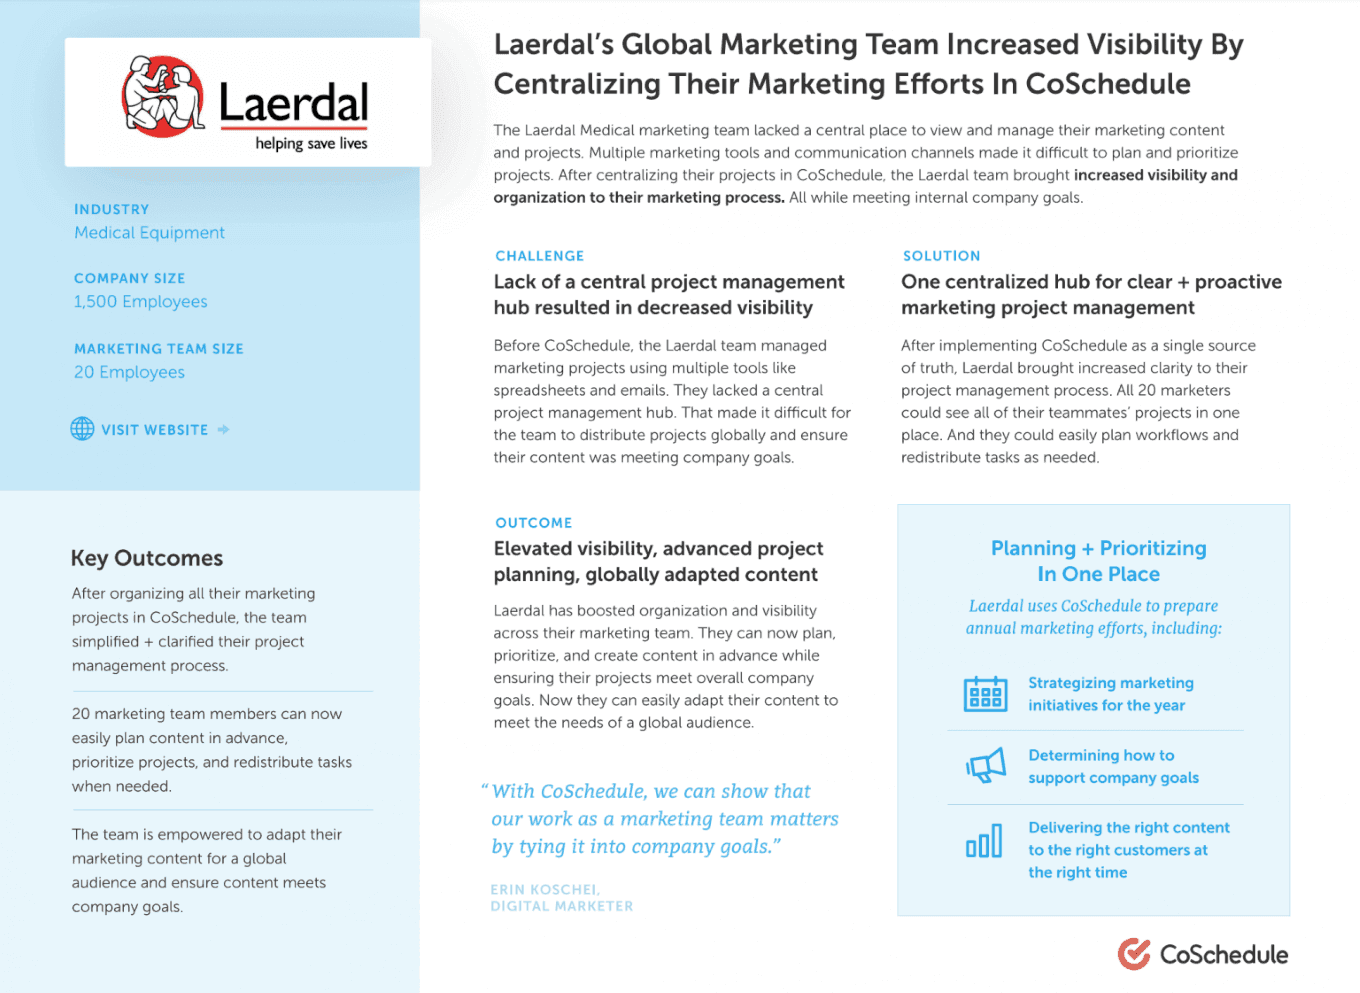 Example of a case study: "Laerdal's Global Marketing Team Increased Visibility By Centralizing Their Marketing Efforts In CoSchedule" by Laerdal